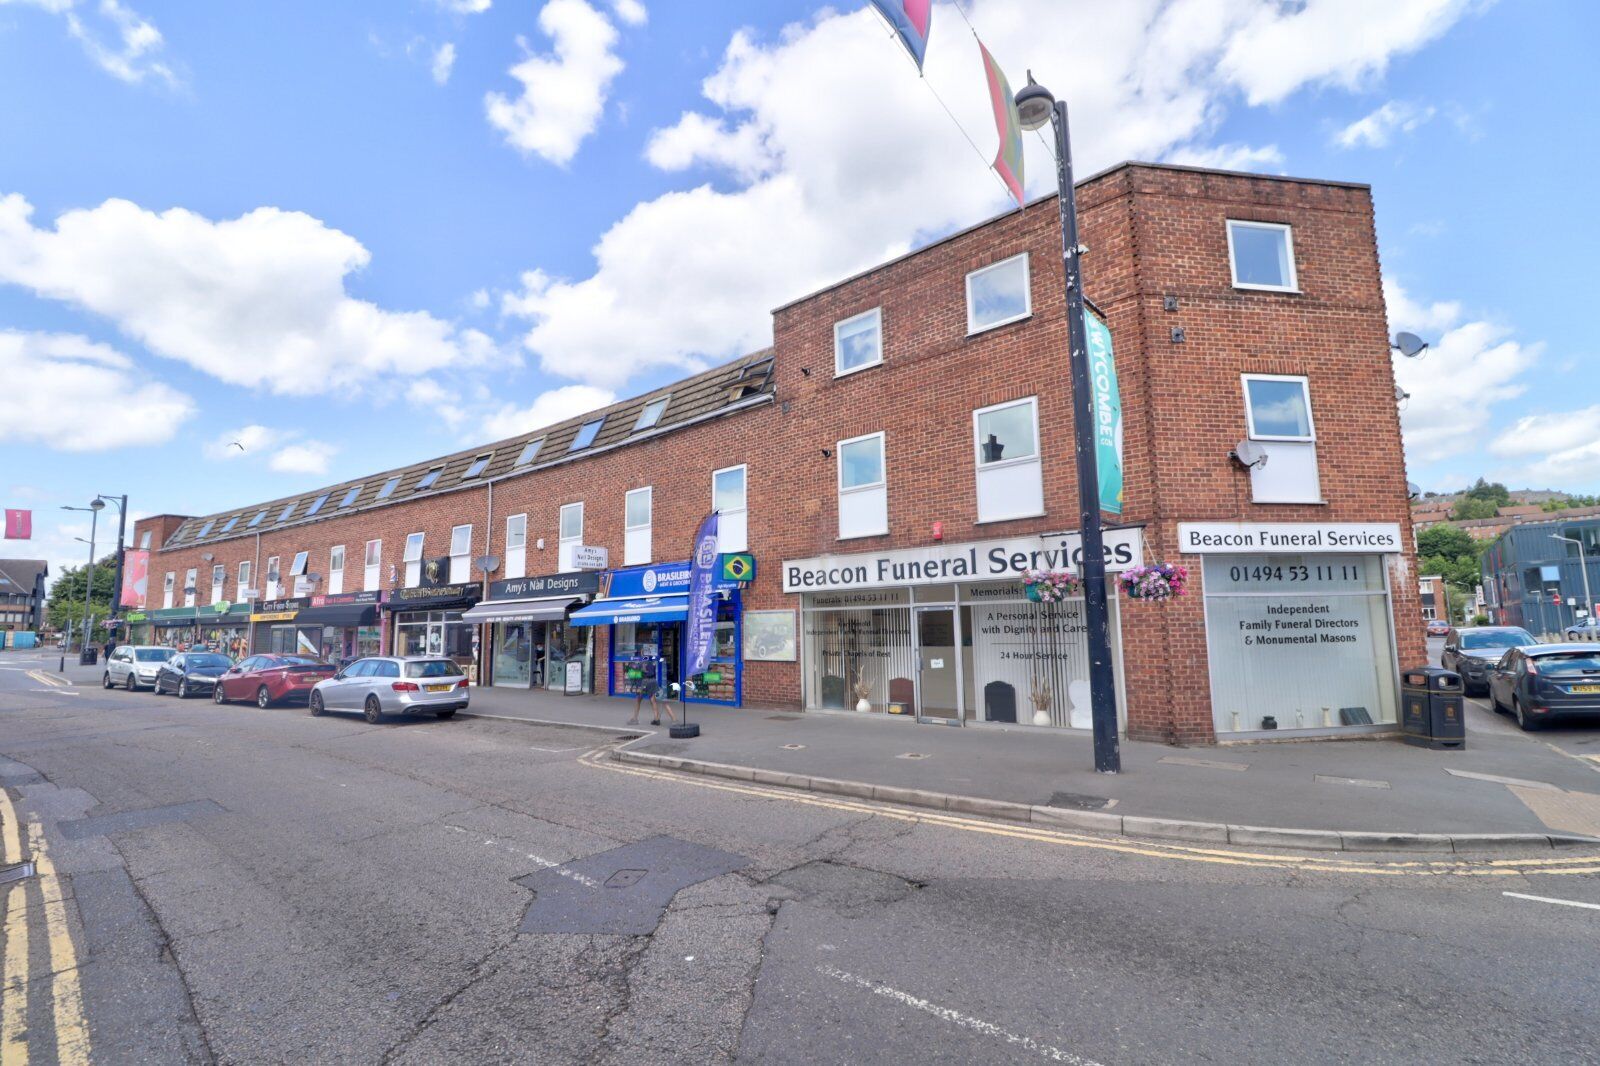 4 bedroom  flat to rent, Available now Desborough Road, High Wycombe, HP11, main image